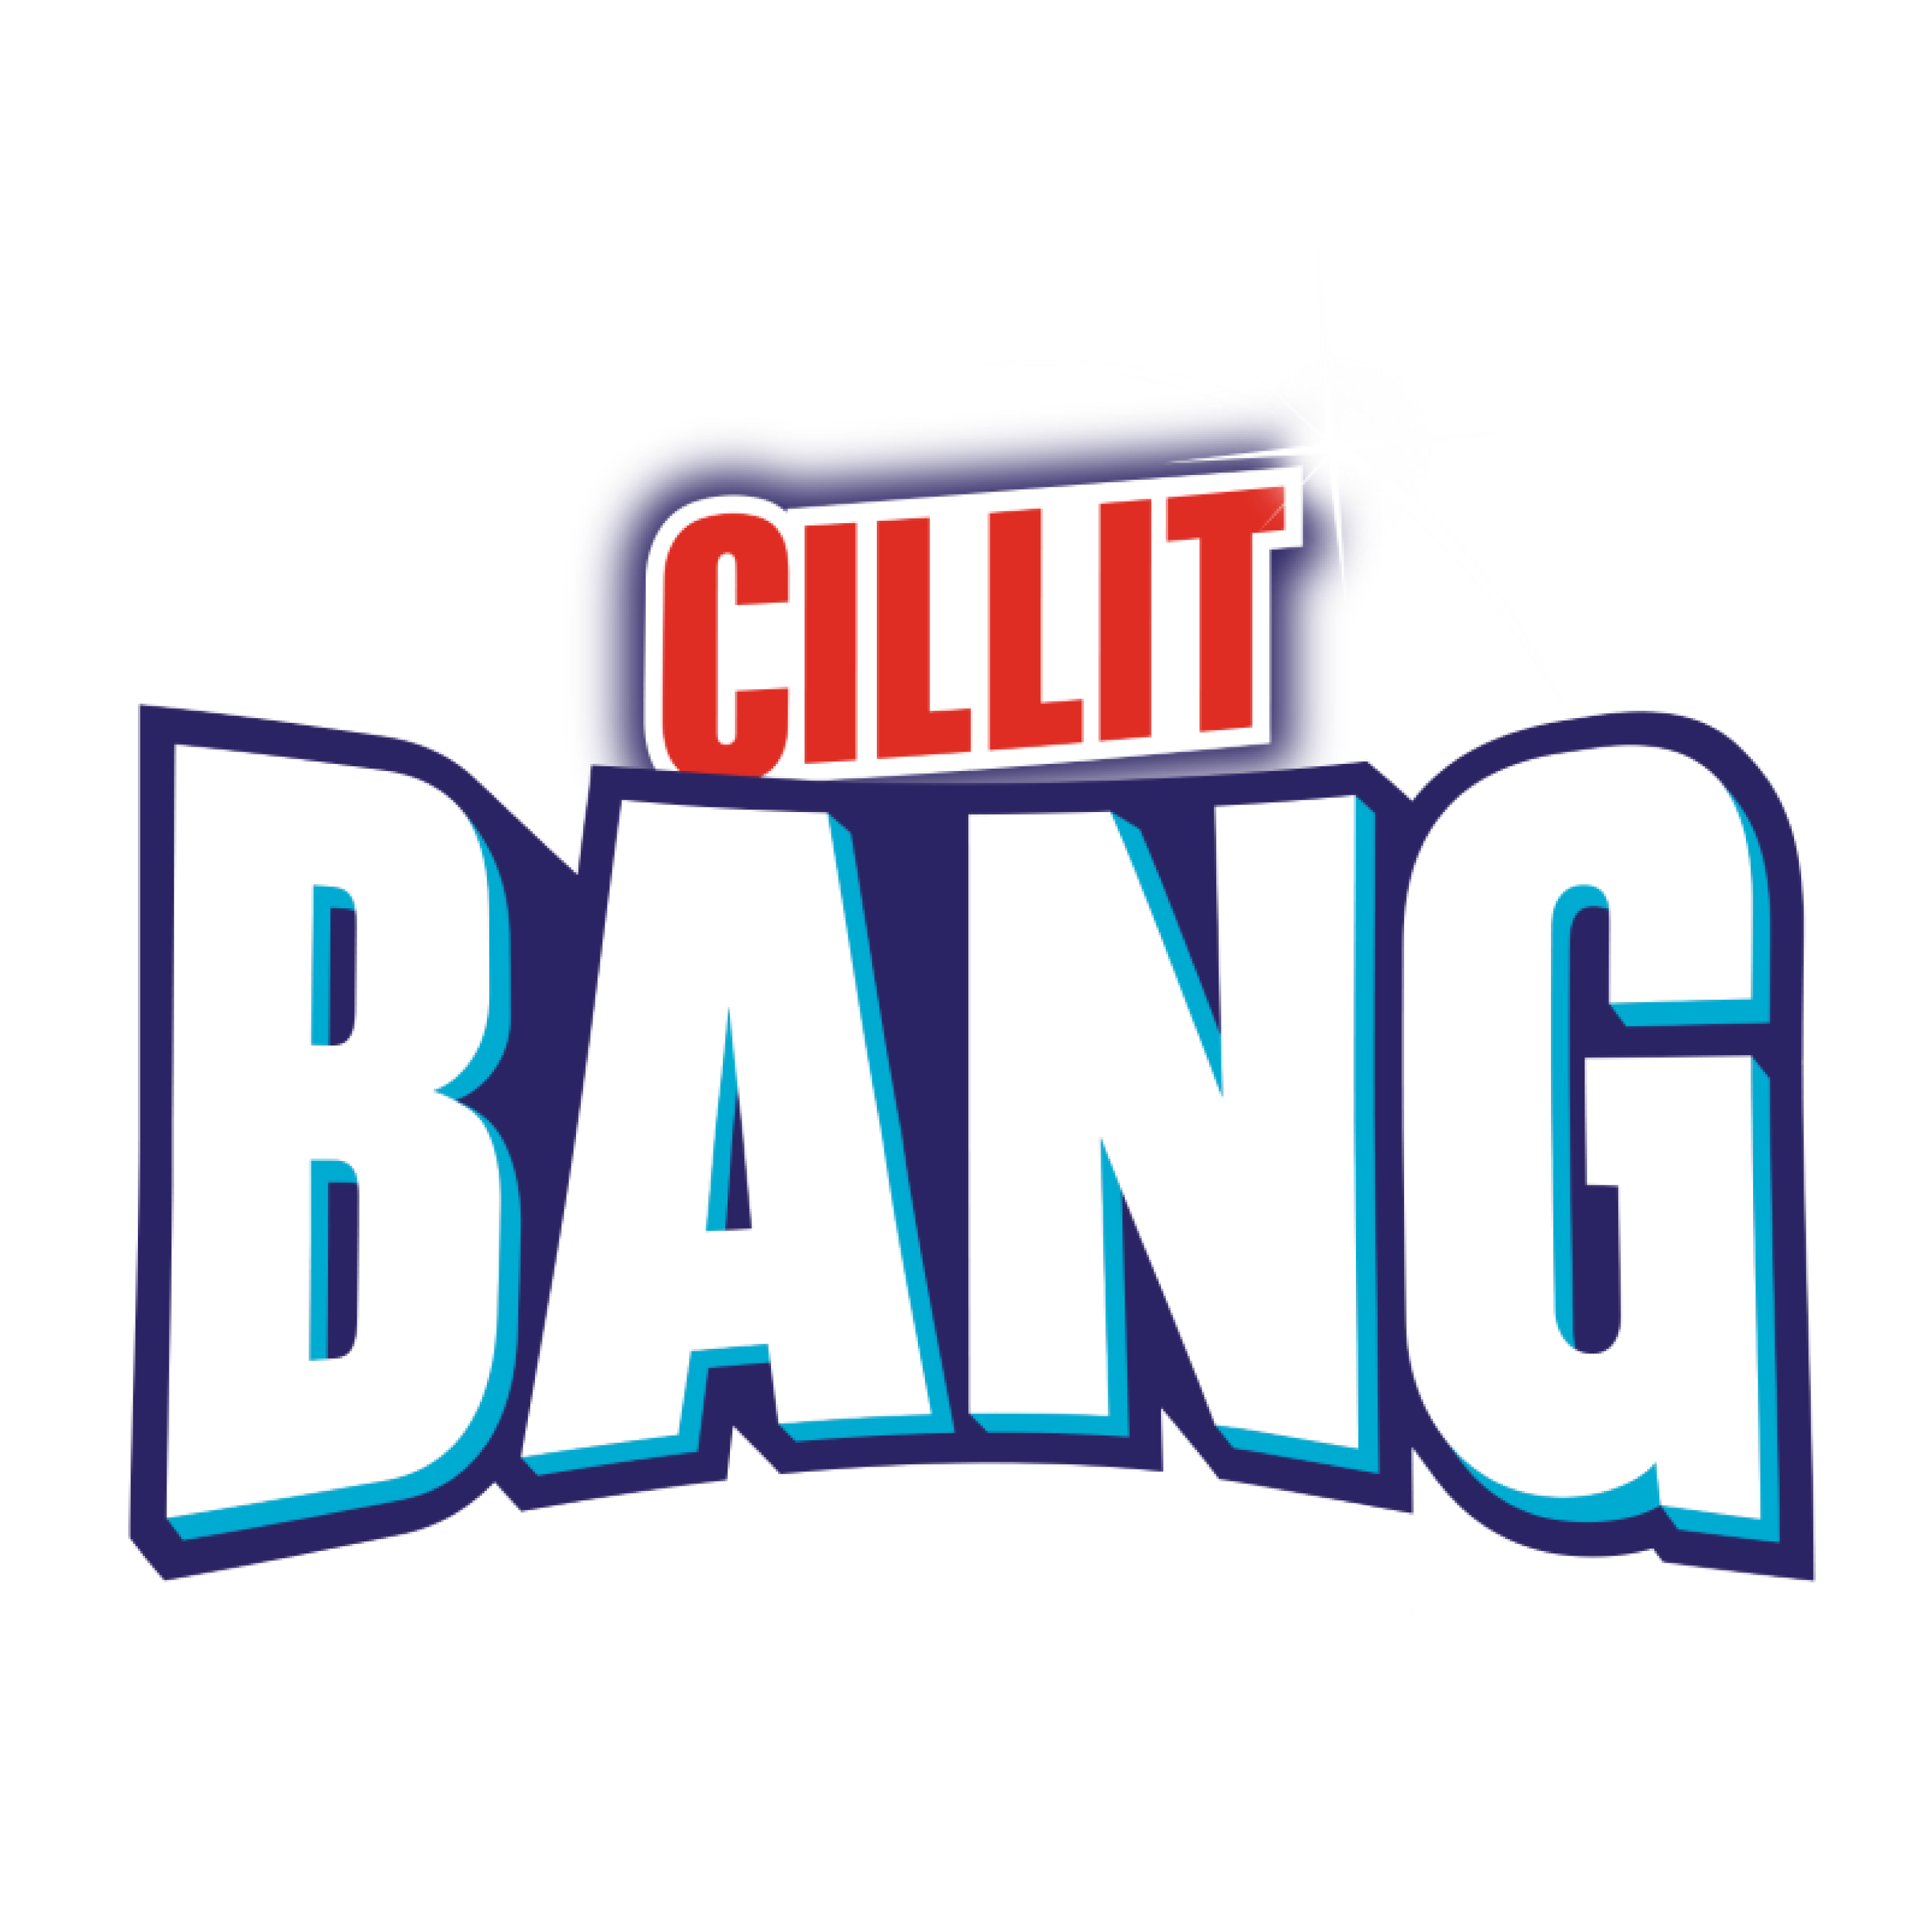 Bang Energy Stickers for Sale | Redbubble